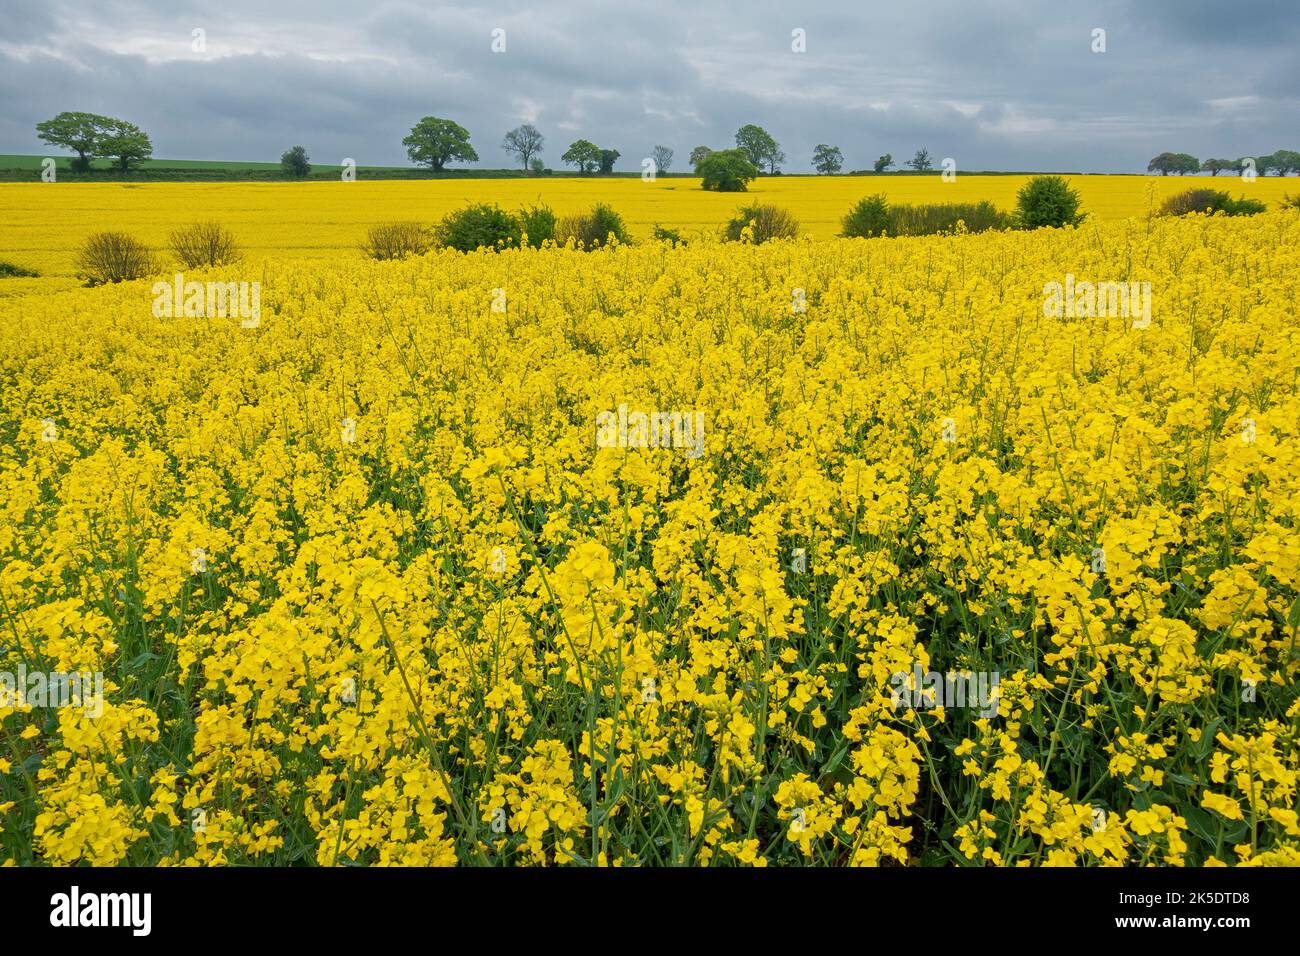 Fields of rapeseed growing next to the South Downs Way walking route in Hampshire, England, UK Stock Photo